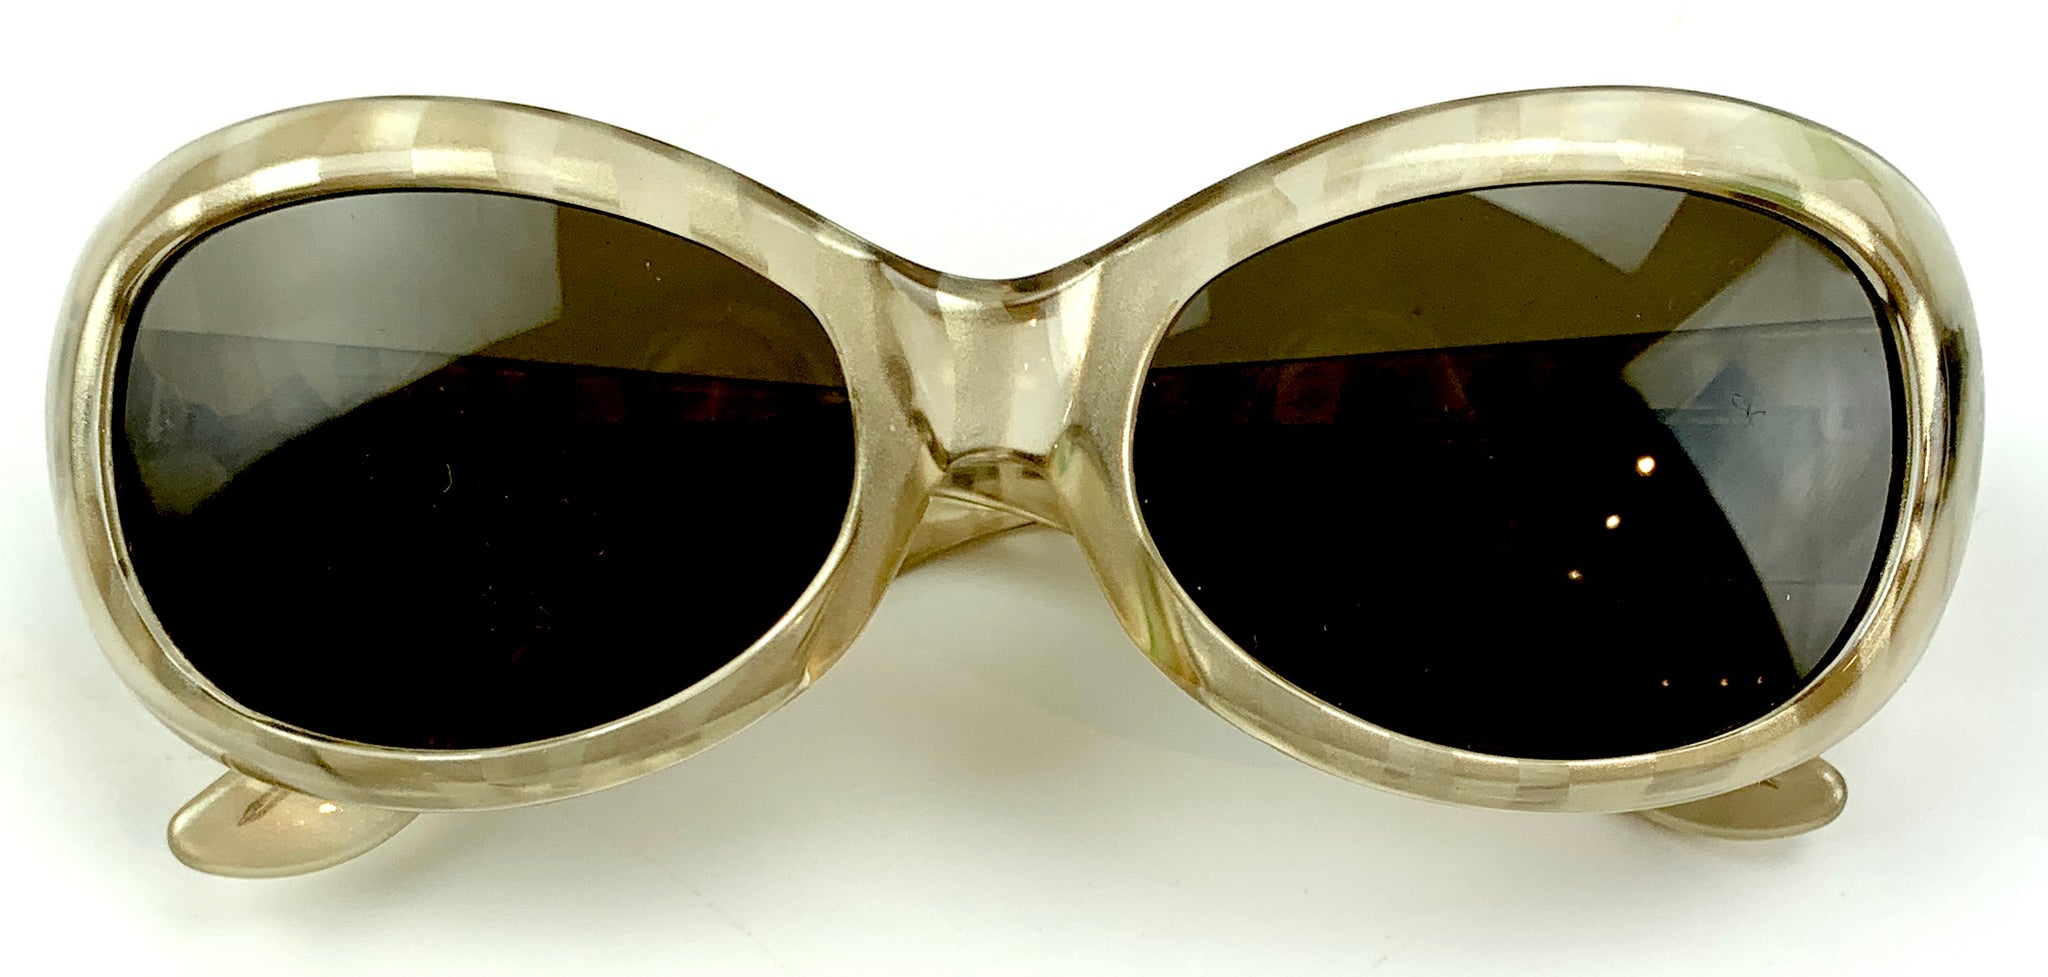 [The Golden Girls] McClanahan, Rue. (1934–2010) Perfume Bottle and Donald J. Pliner Sunglasses from McClanahan Collection